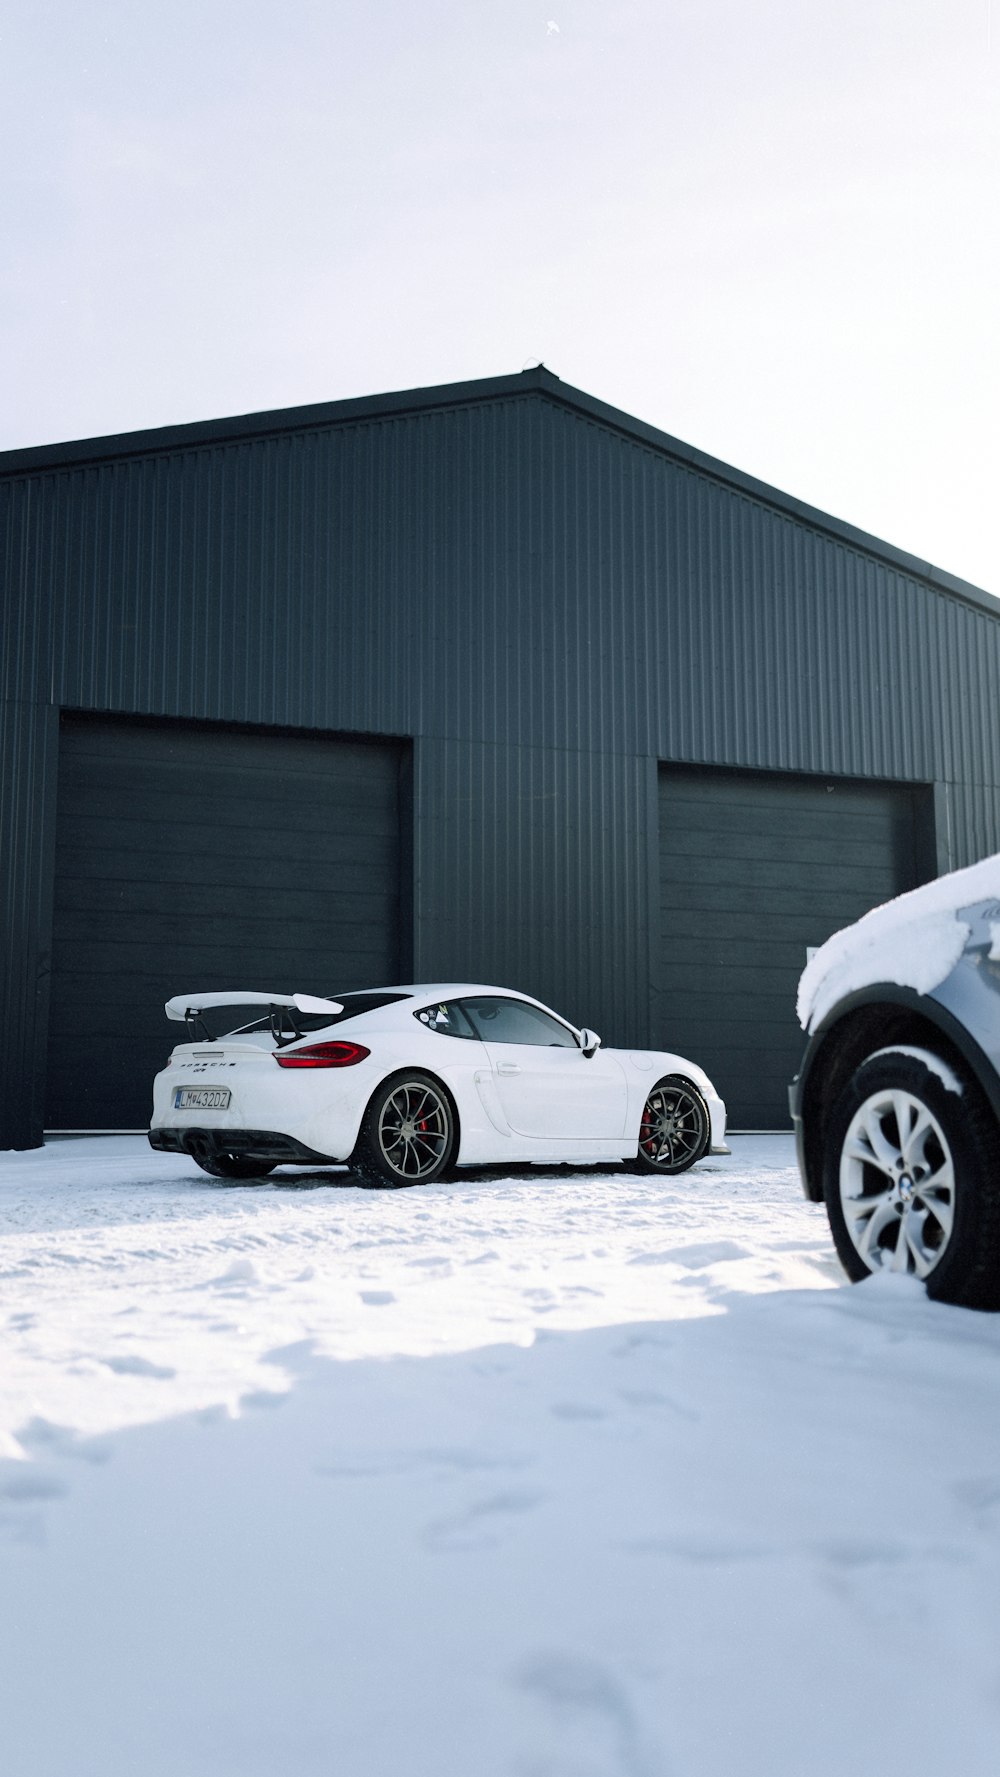 two cars parked in front of a building in the snow